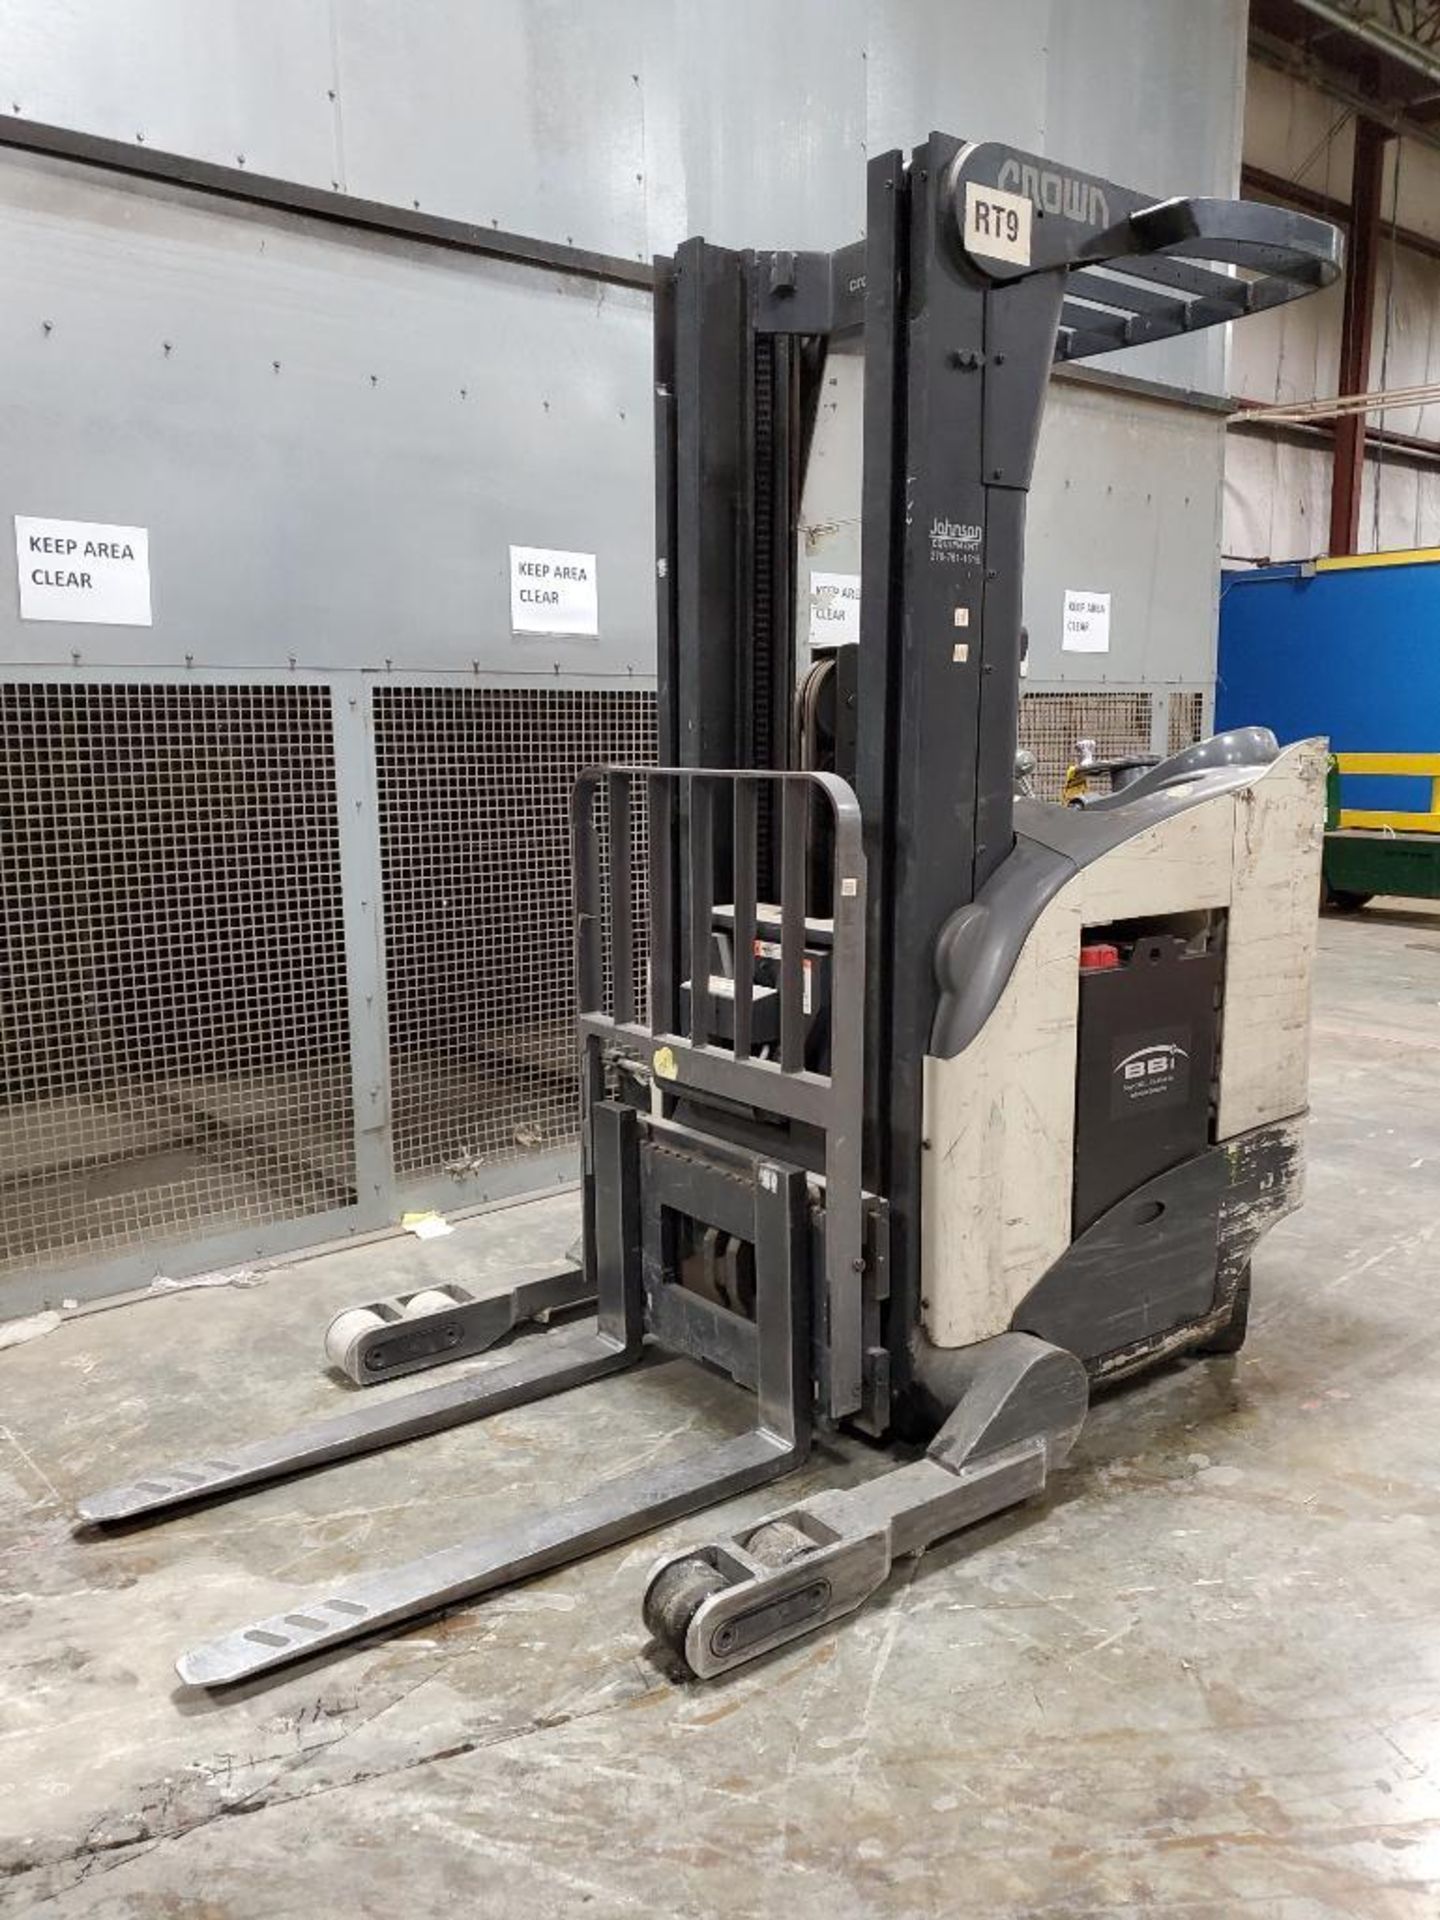 2007 RR 5200 Series Electric Reach Truck, Model RR5220-35, S/N 1A317340, 36V, 3,500 LB. Capacity, 19 - Image 2 of 13